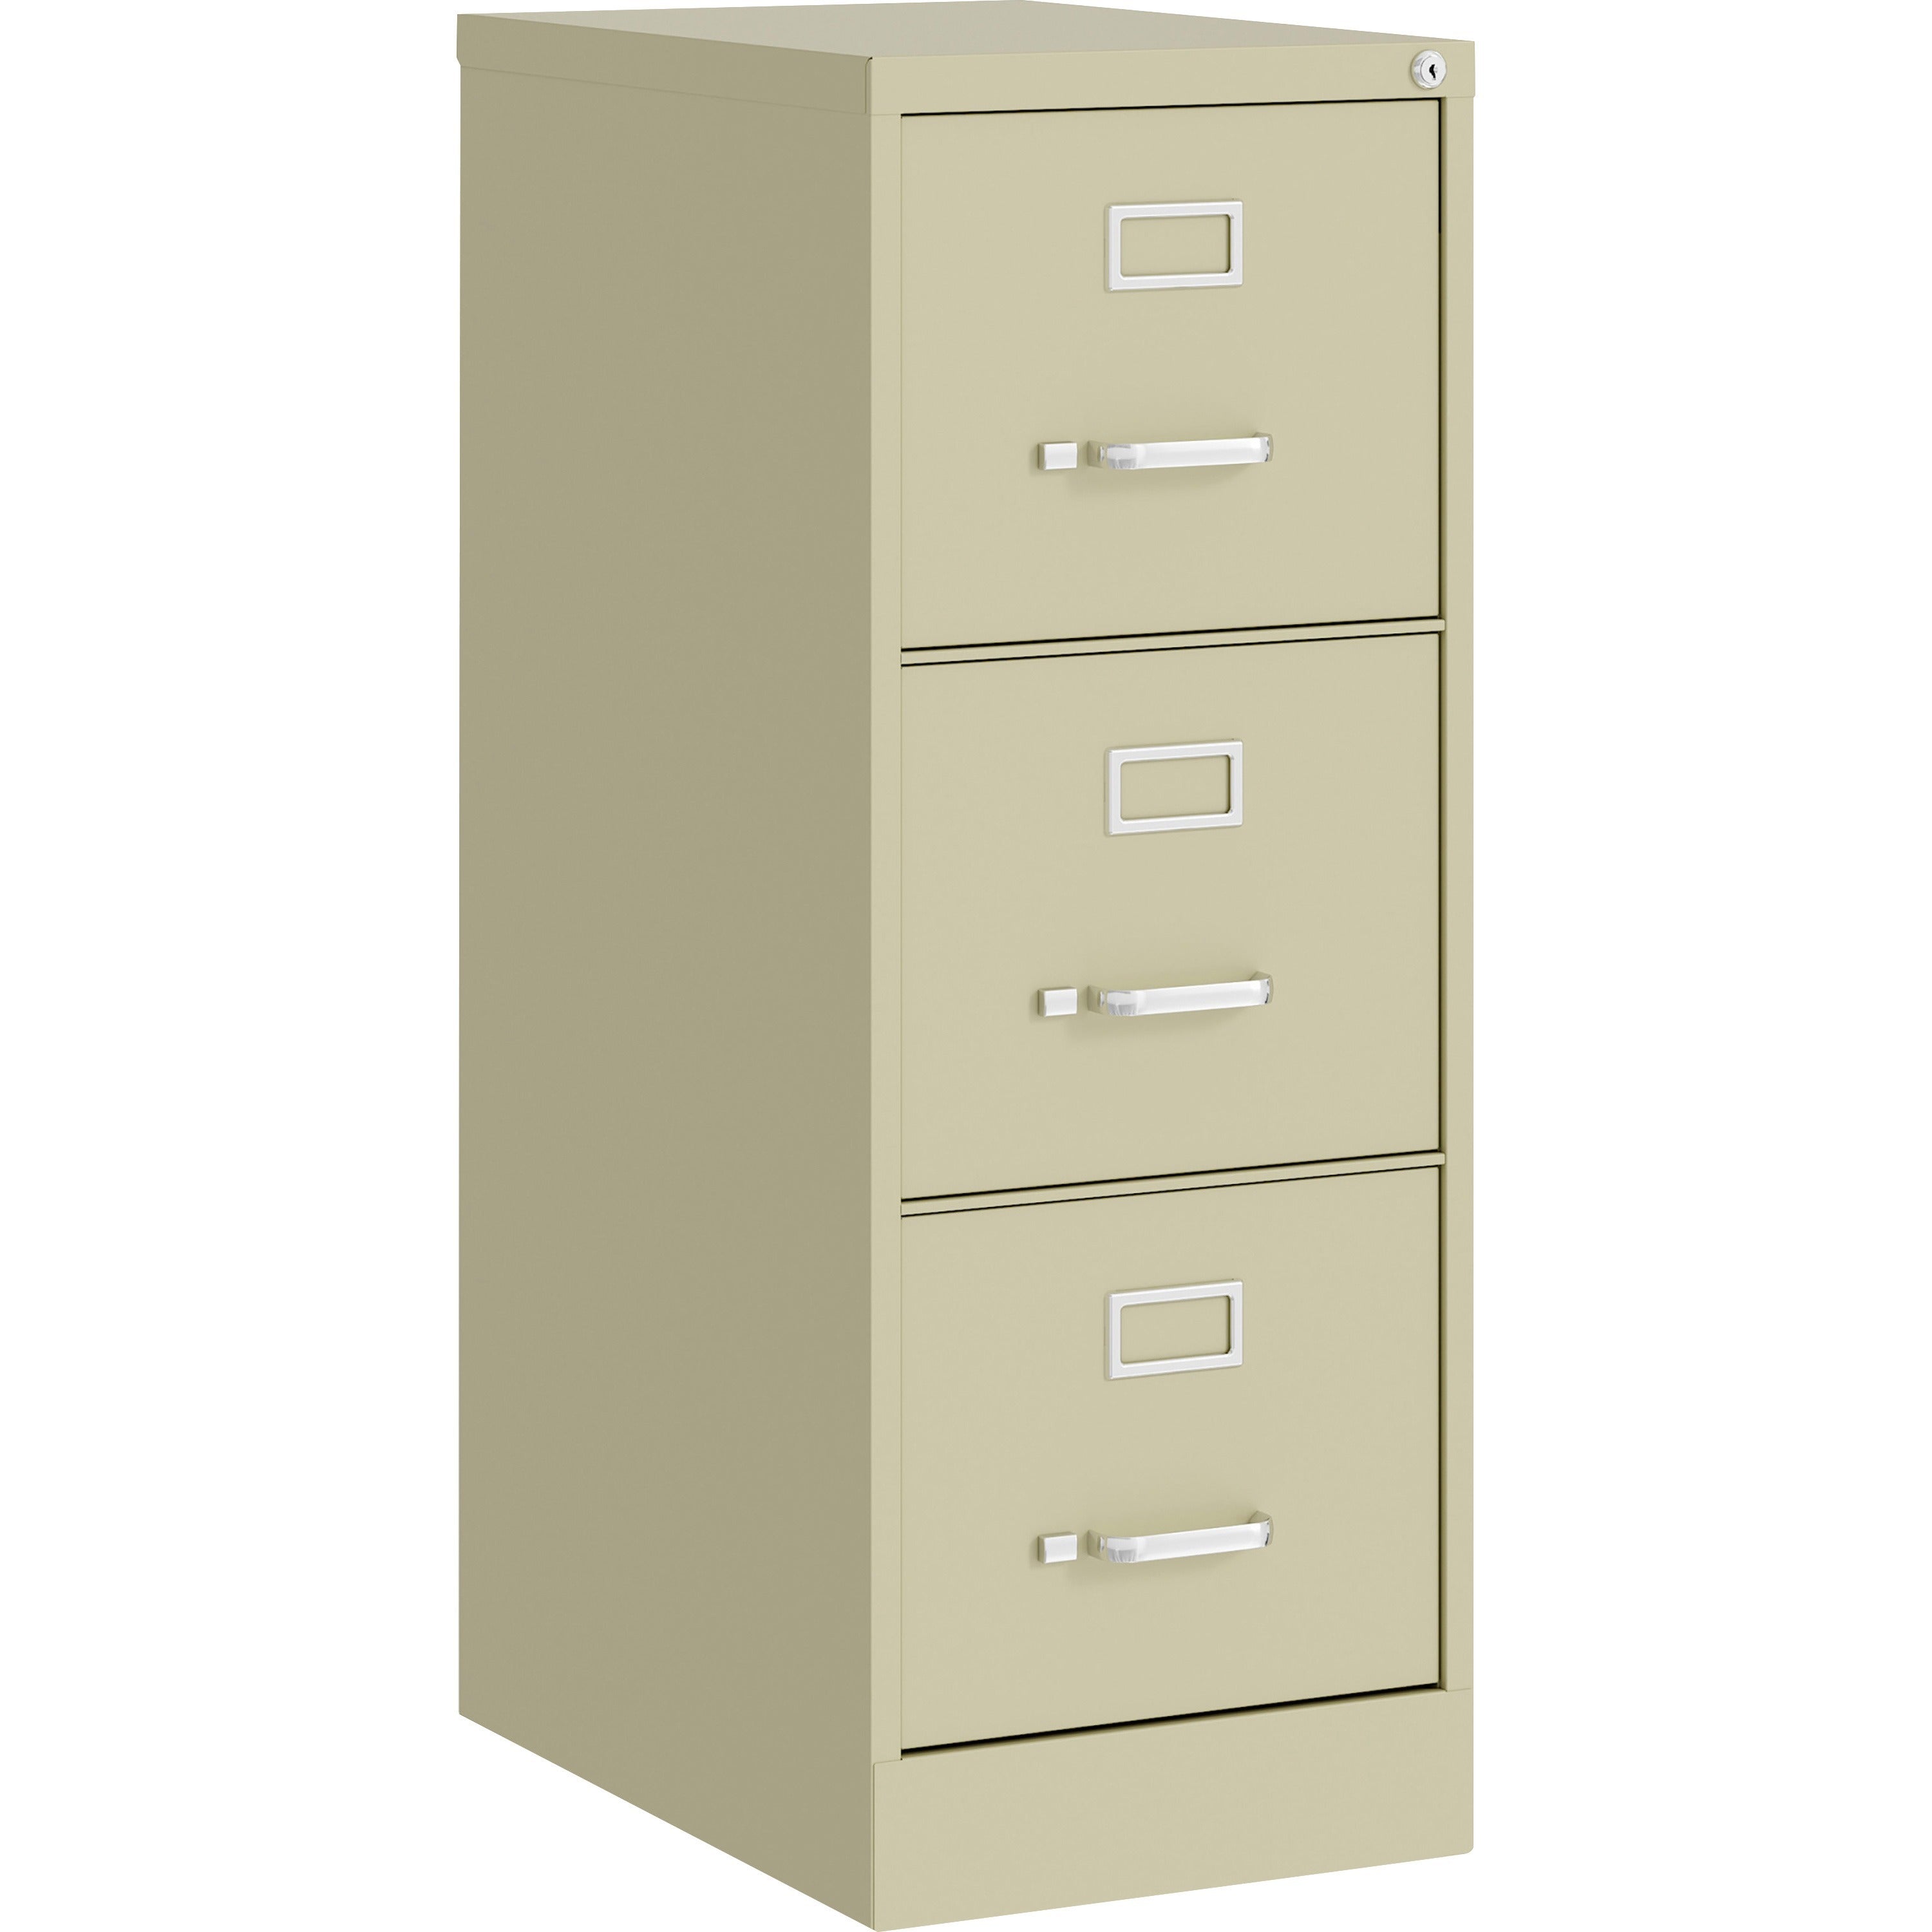 lorell-fortress-series-22-commercial-grade-vertical-file-cabinet-15-x-22-x-402-3-x-drawers-for-file-letter-vertical-ball-bearing-suspension-removable-lock-pull-handle-wire-management-putty-steel-recycled_llr42296 - 1